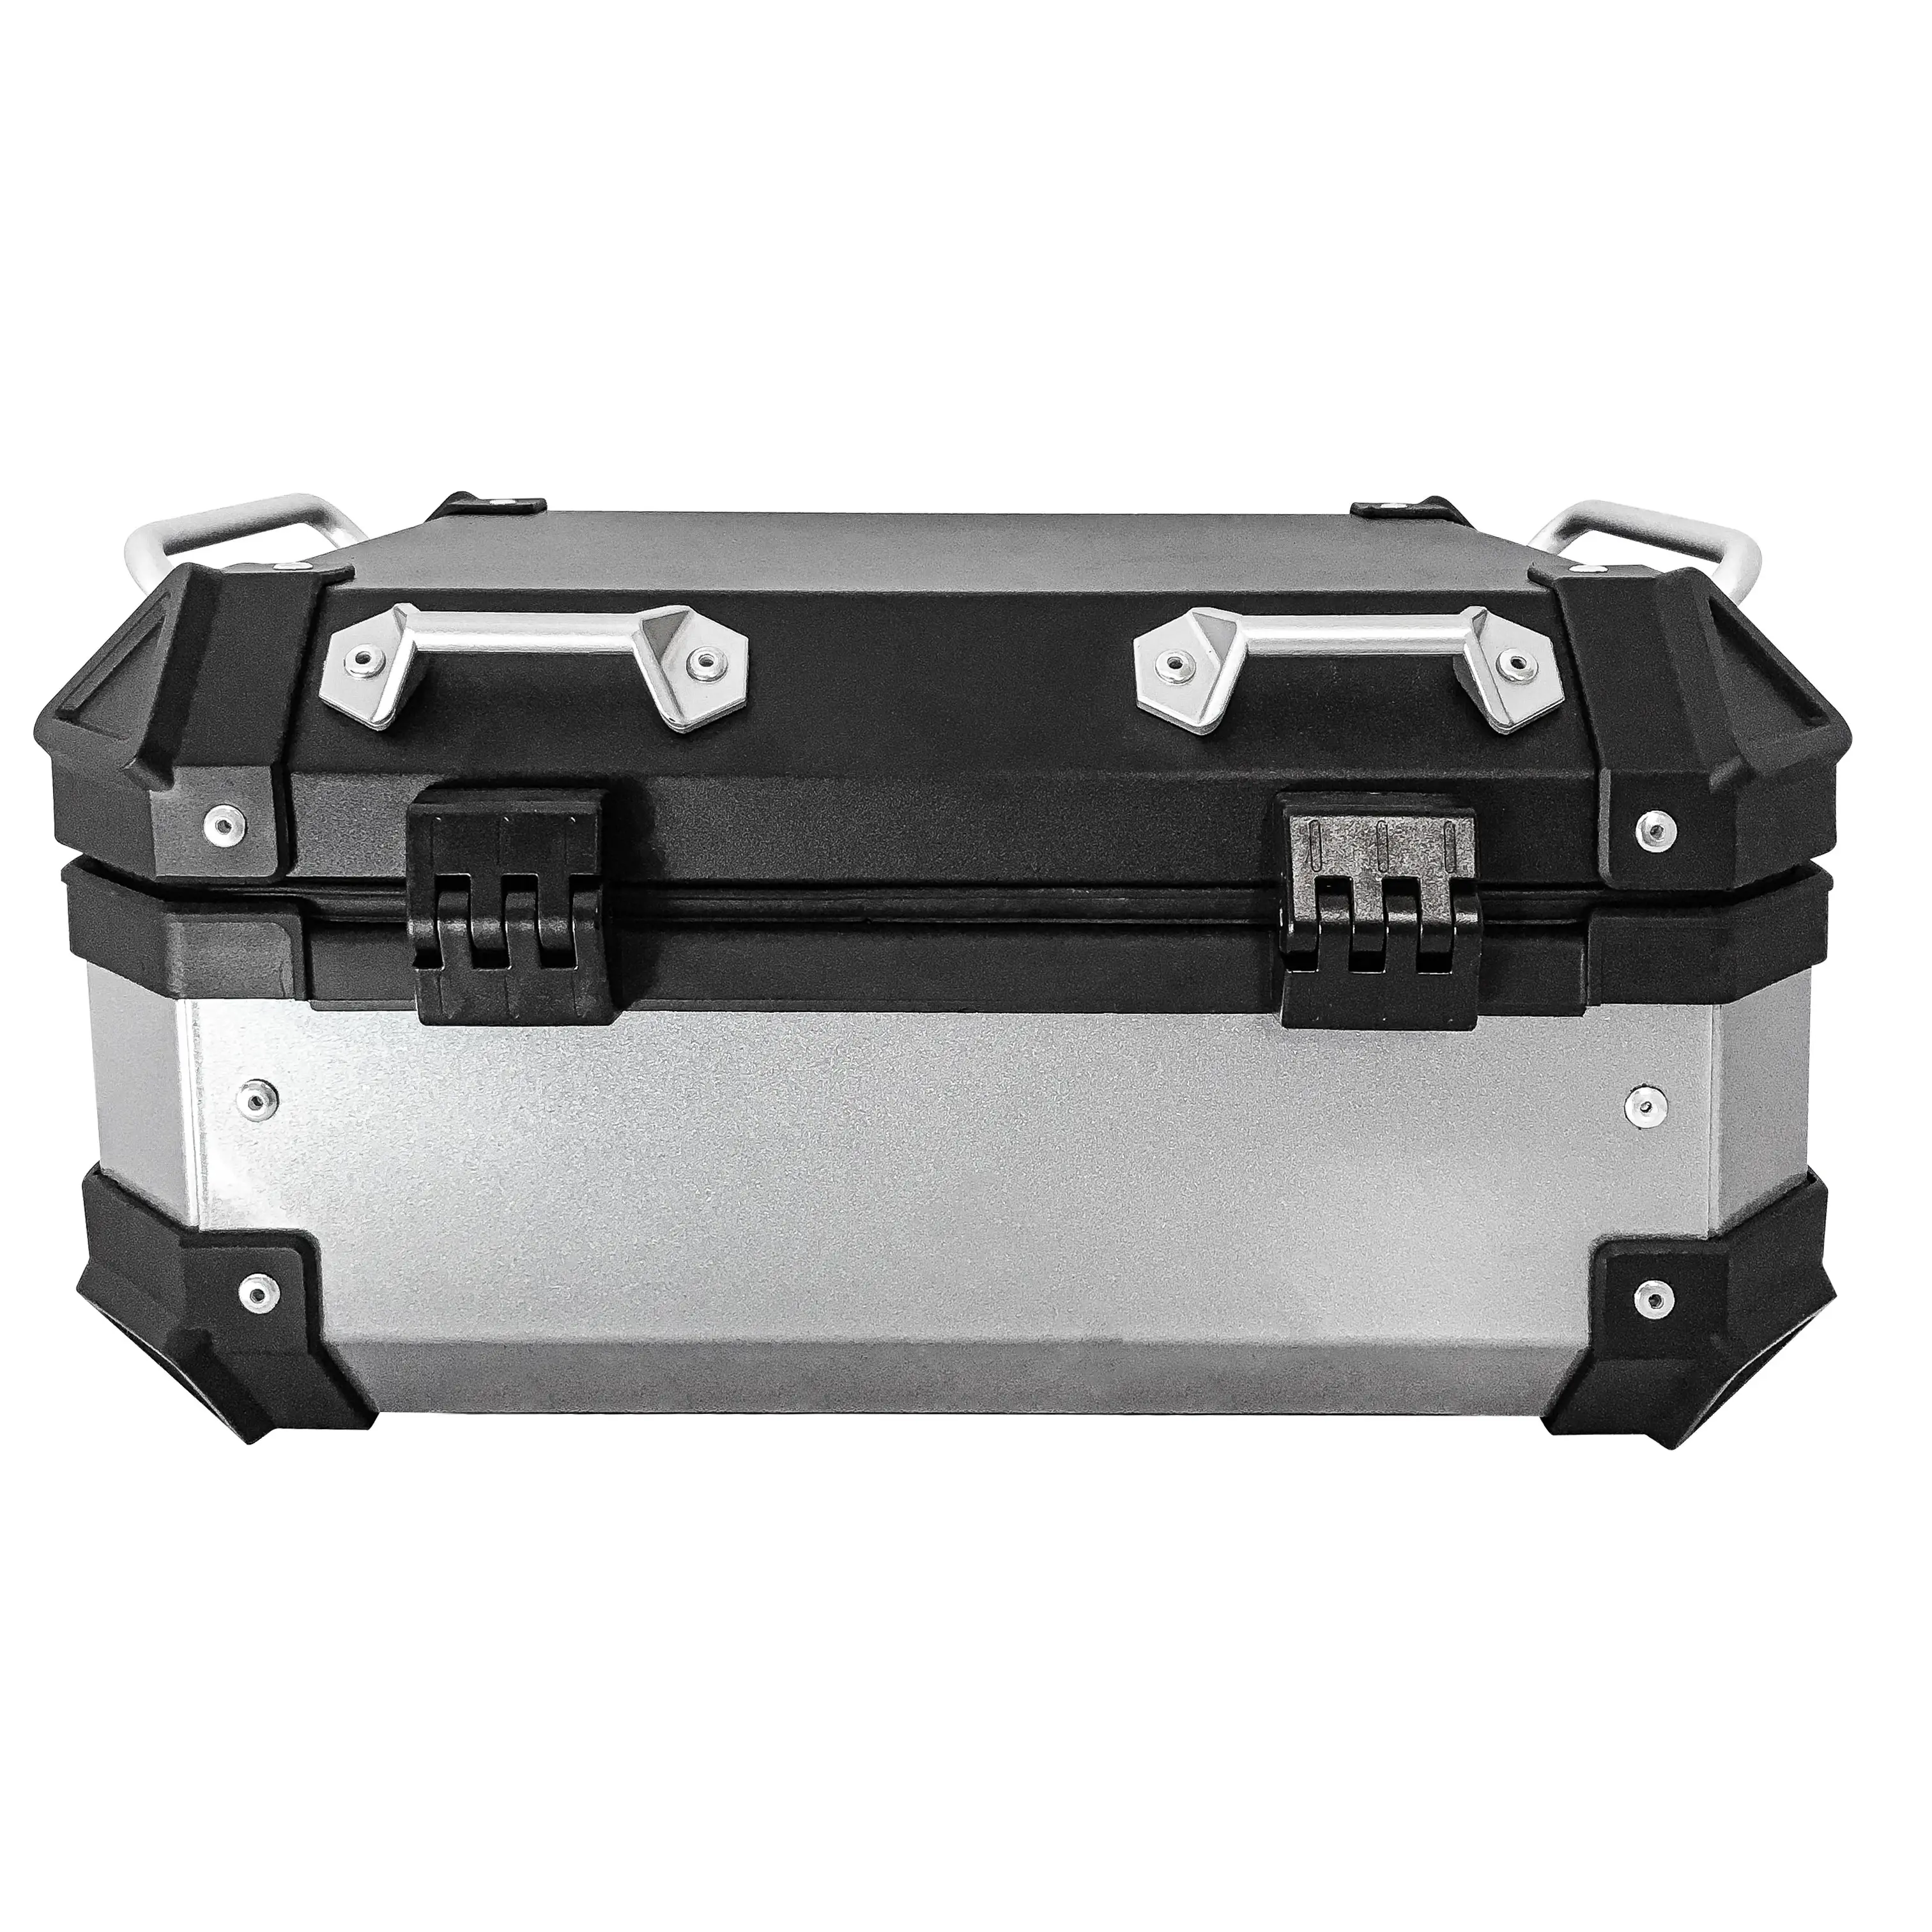 22L High quality Motorcycle Delivery Trunk Waterproof Top Box Aluminum Alloy Motorcycle